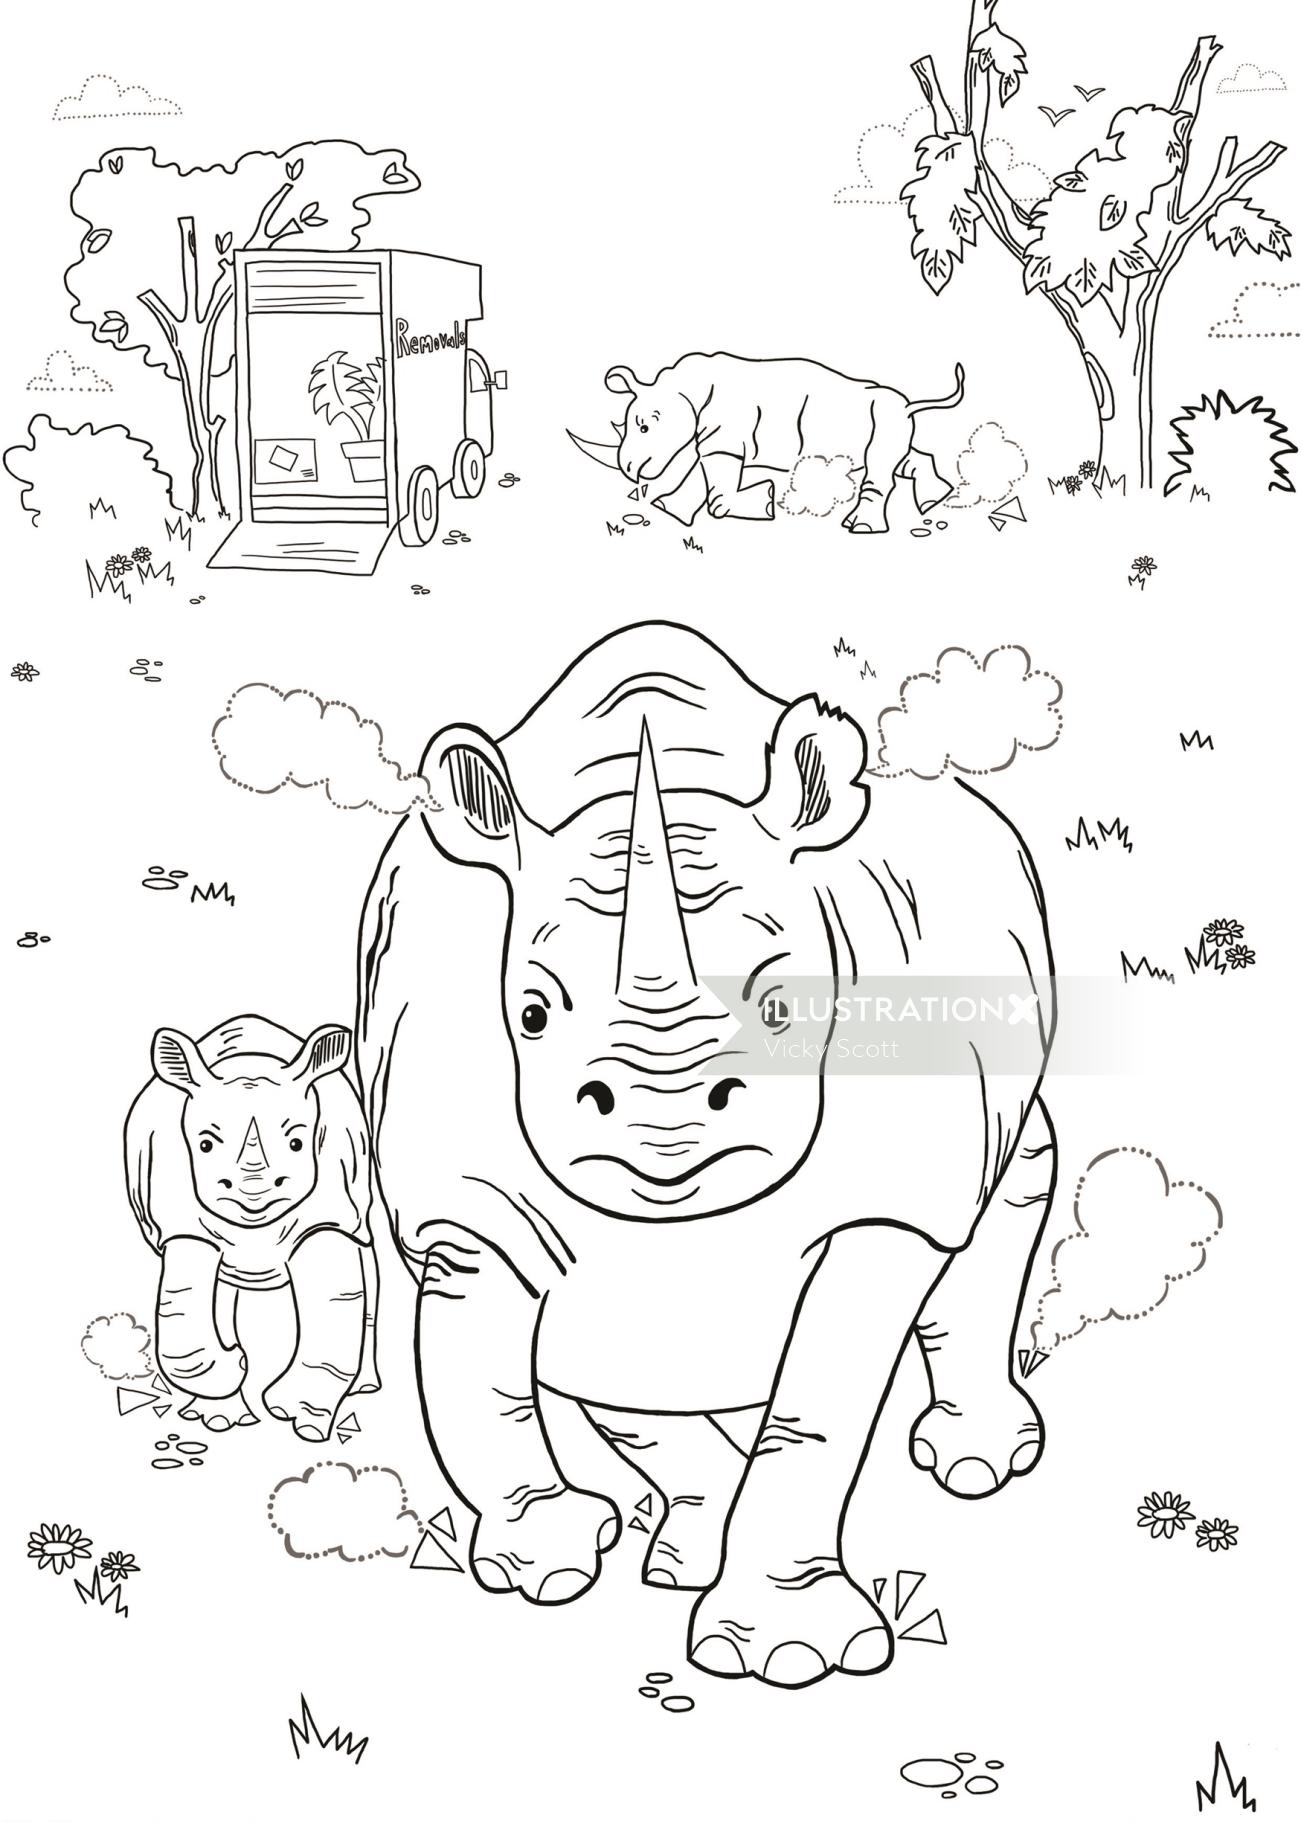 rhino, humour, protest, wildlife, animals, zoo, sea, angry animals, colouring page, colouring book, 